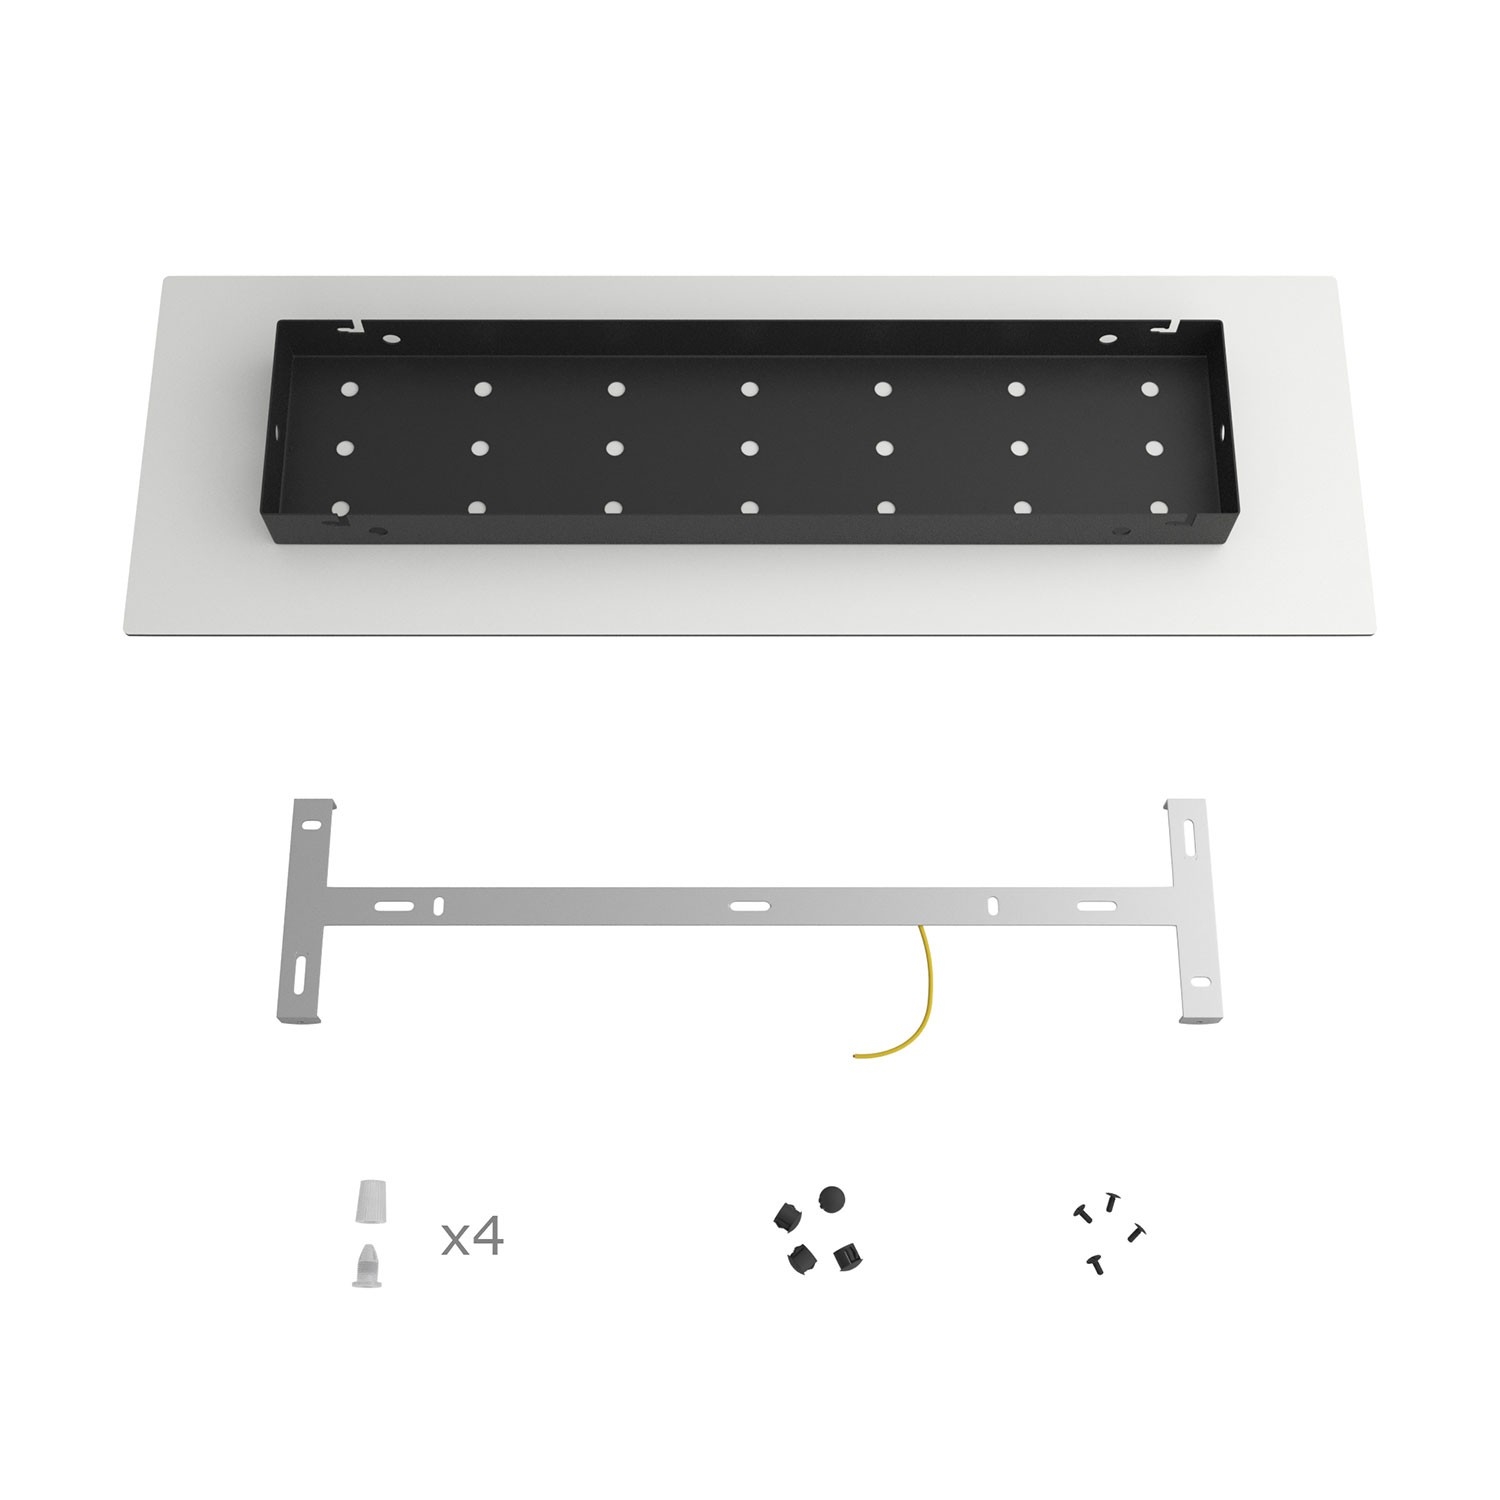 4 hole in line - EXTRA LARGE Rectangular Ceiling Canopy Kit - Rose One System, 675 x 225 mm Cover